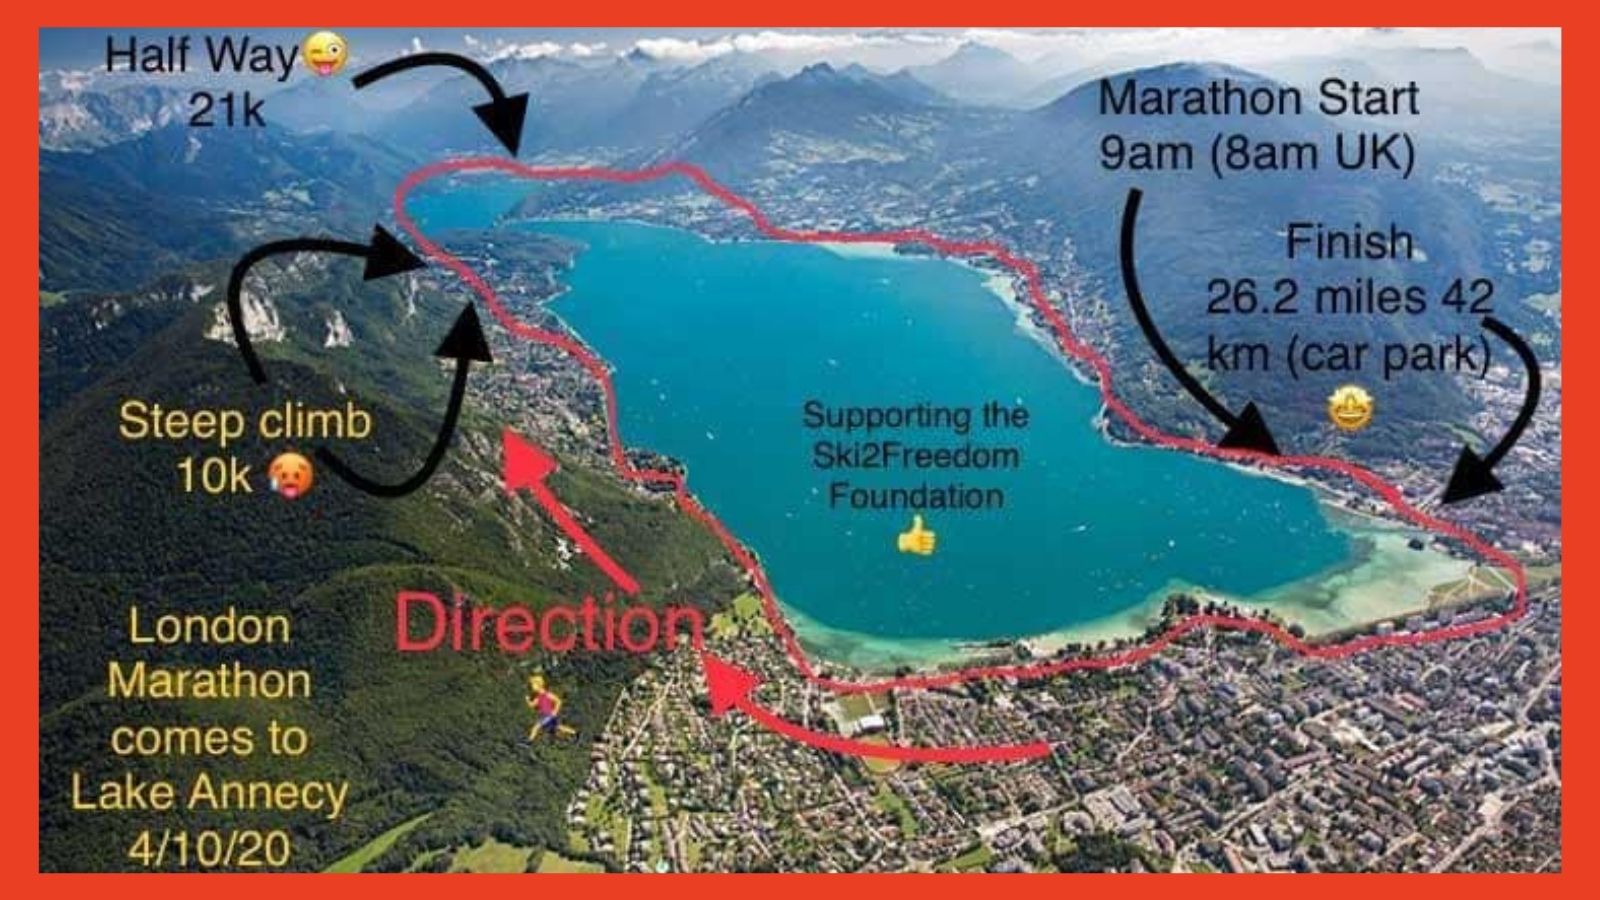 map showing Mark's running route around Lake Annecy - marking out the start, finish & climb section